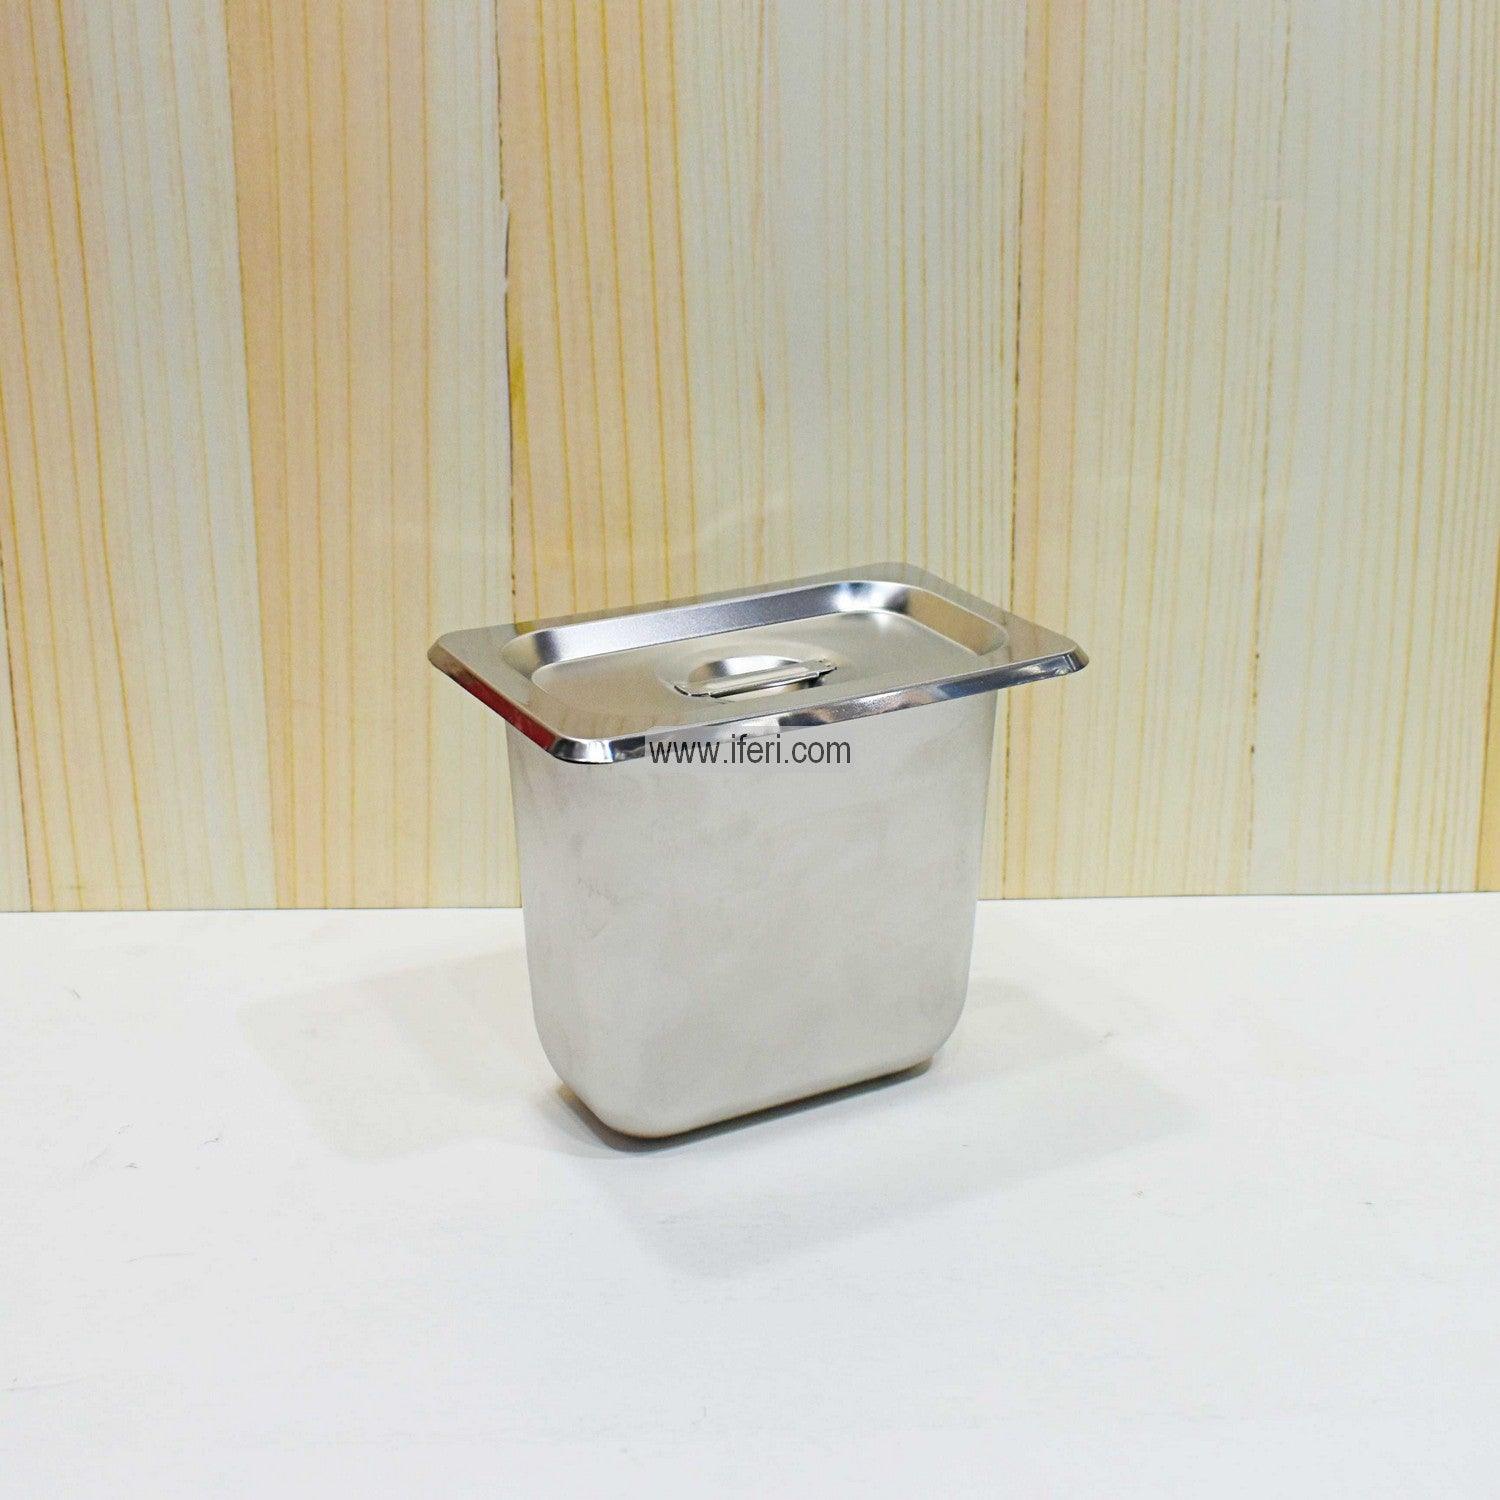 6.8 Inch Stainless Steel Food Pan with Lid SN0576 Price in Bangladesh - iferi.com